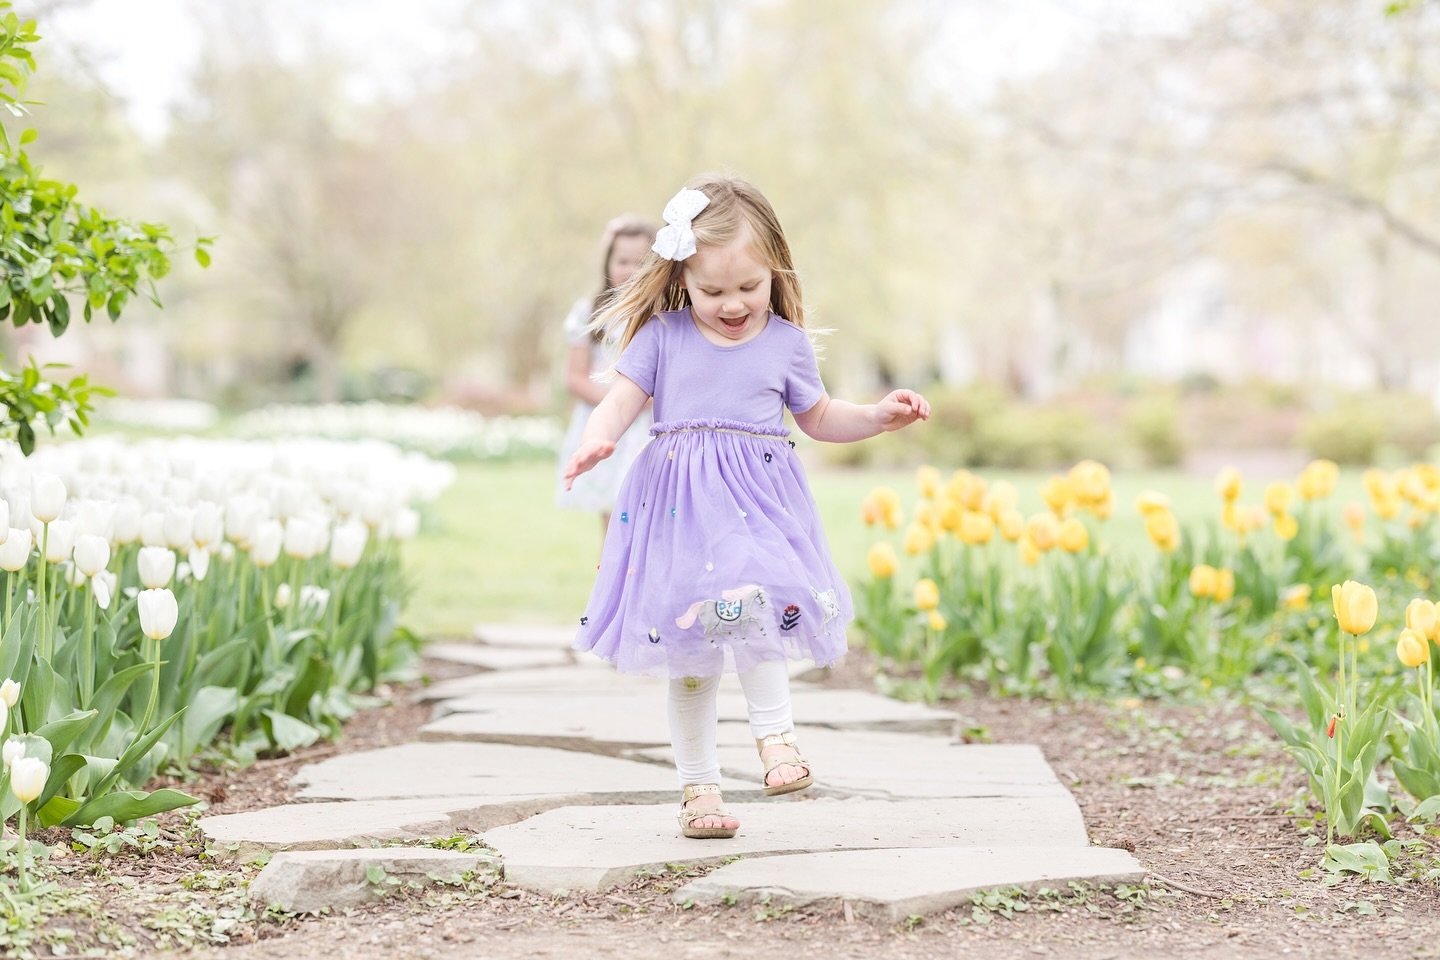 I am up north this weekend for my annual Sherwood Garden minis! I can&rsquo;t wait to work with 15 wonderful families that I have photographed year after year. Spring is here and I am ready for a weekend of capturing sweet joy! 🌷